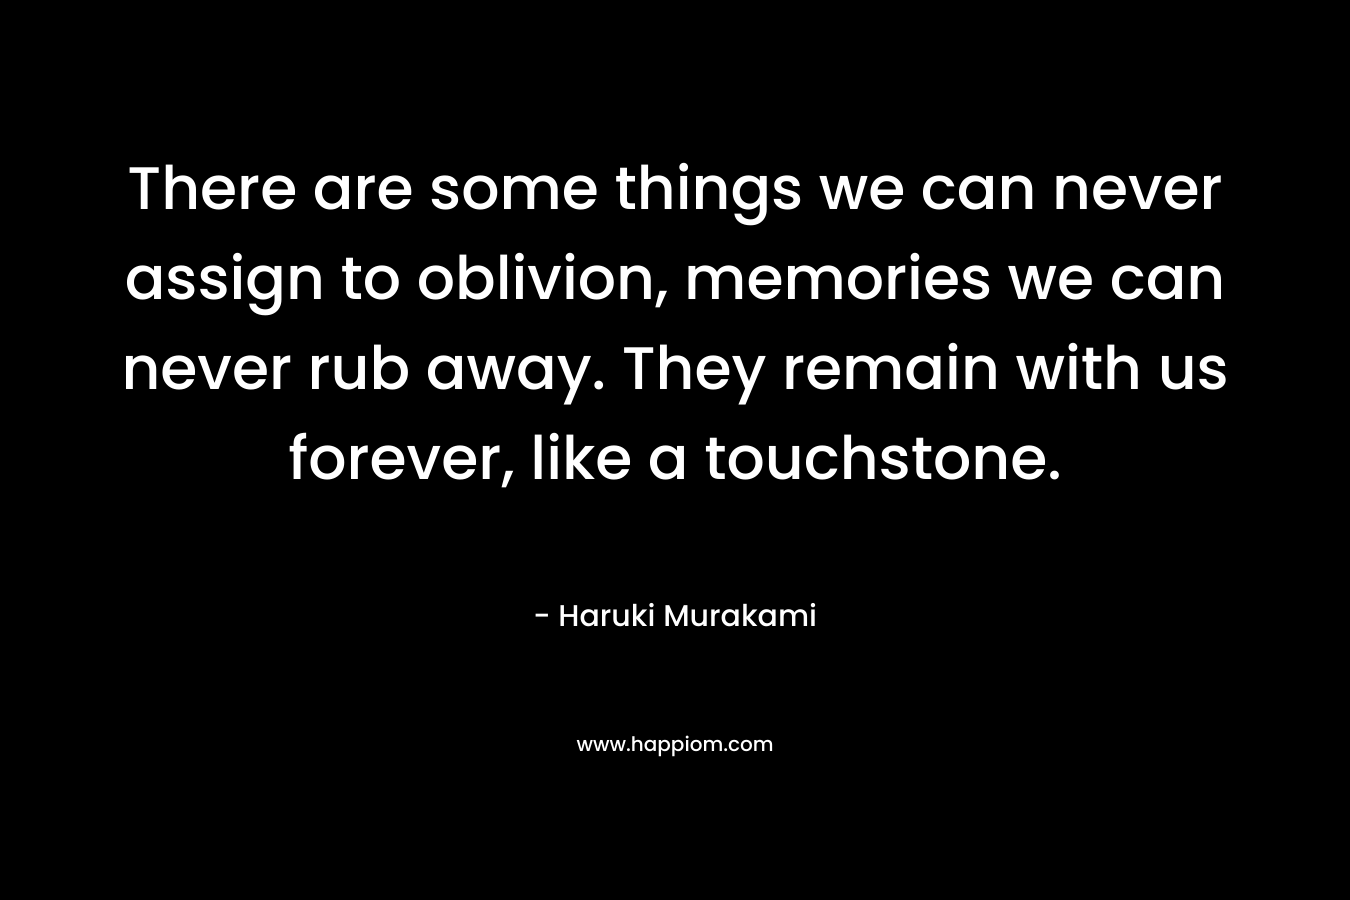 There are some things we can never assign to oblivion, memories we can never rub away. They remain with us forever, like a touchstone. – Haruki Murakami